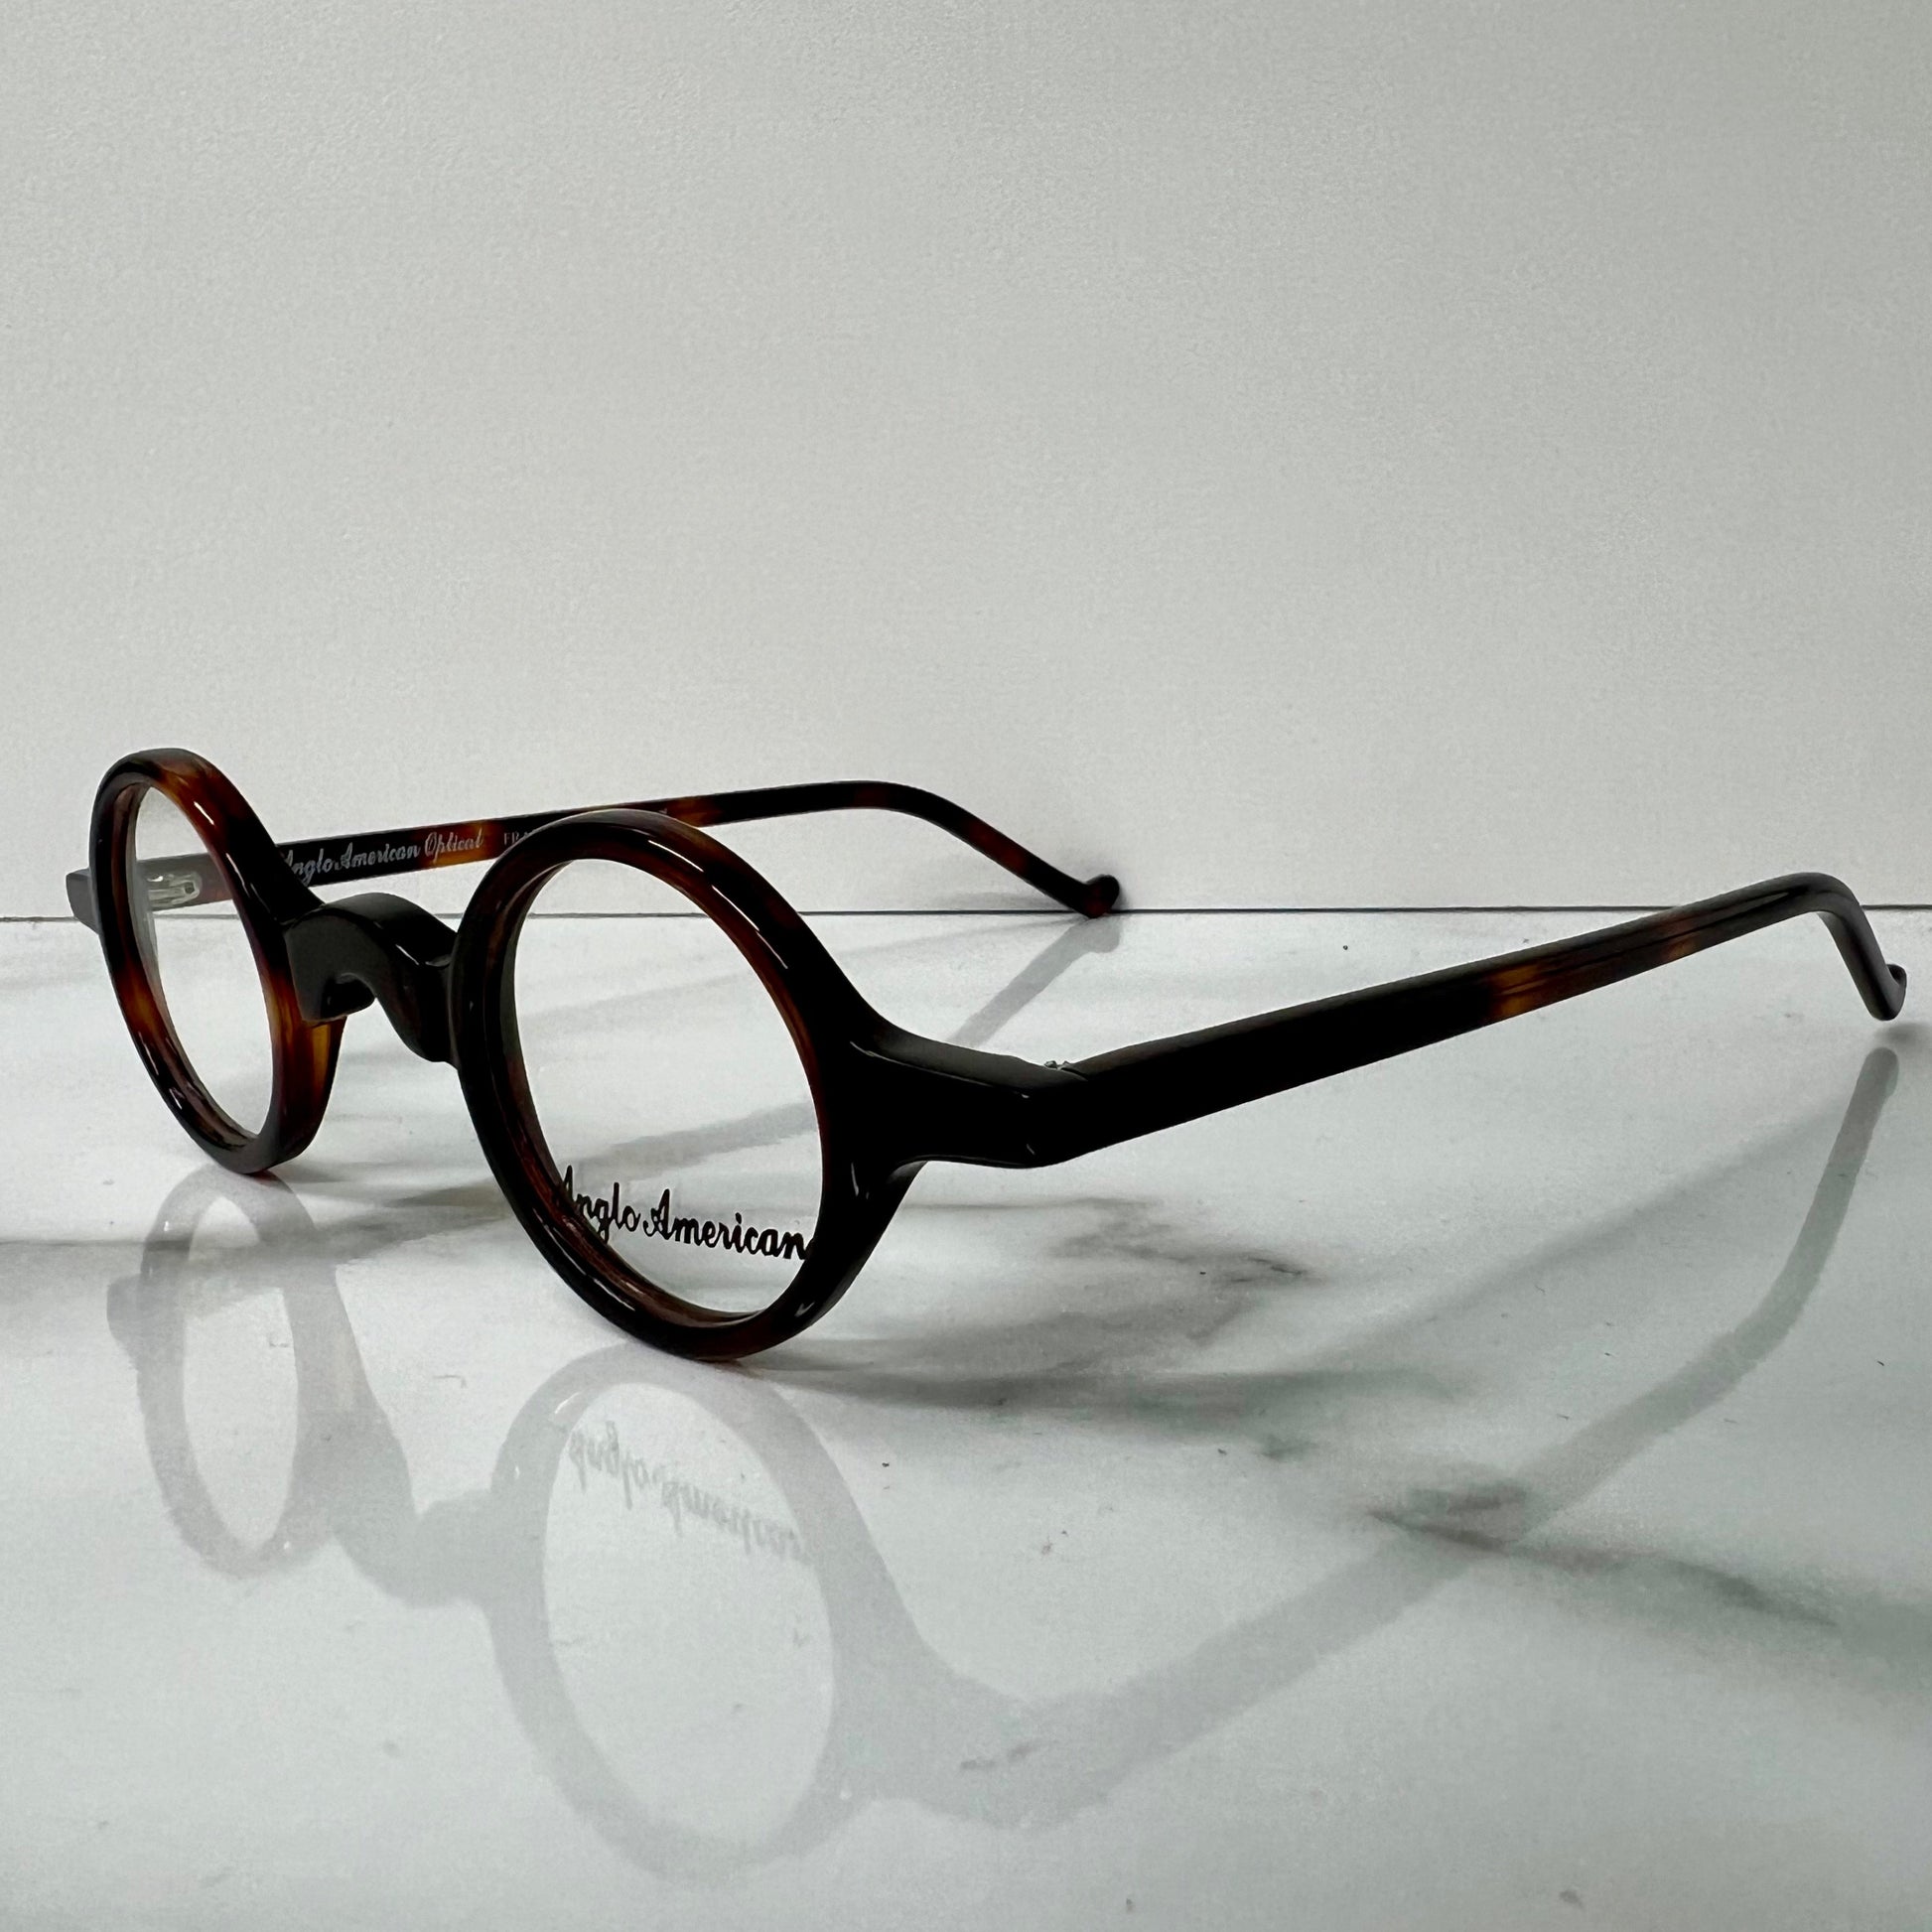 Anglo American Groucho Glasses Frames Round London Eyewear.